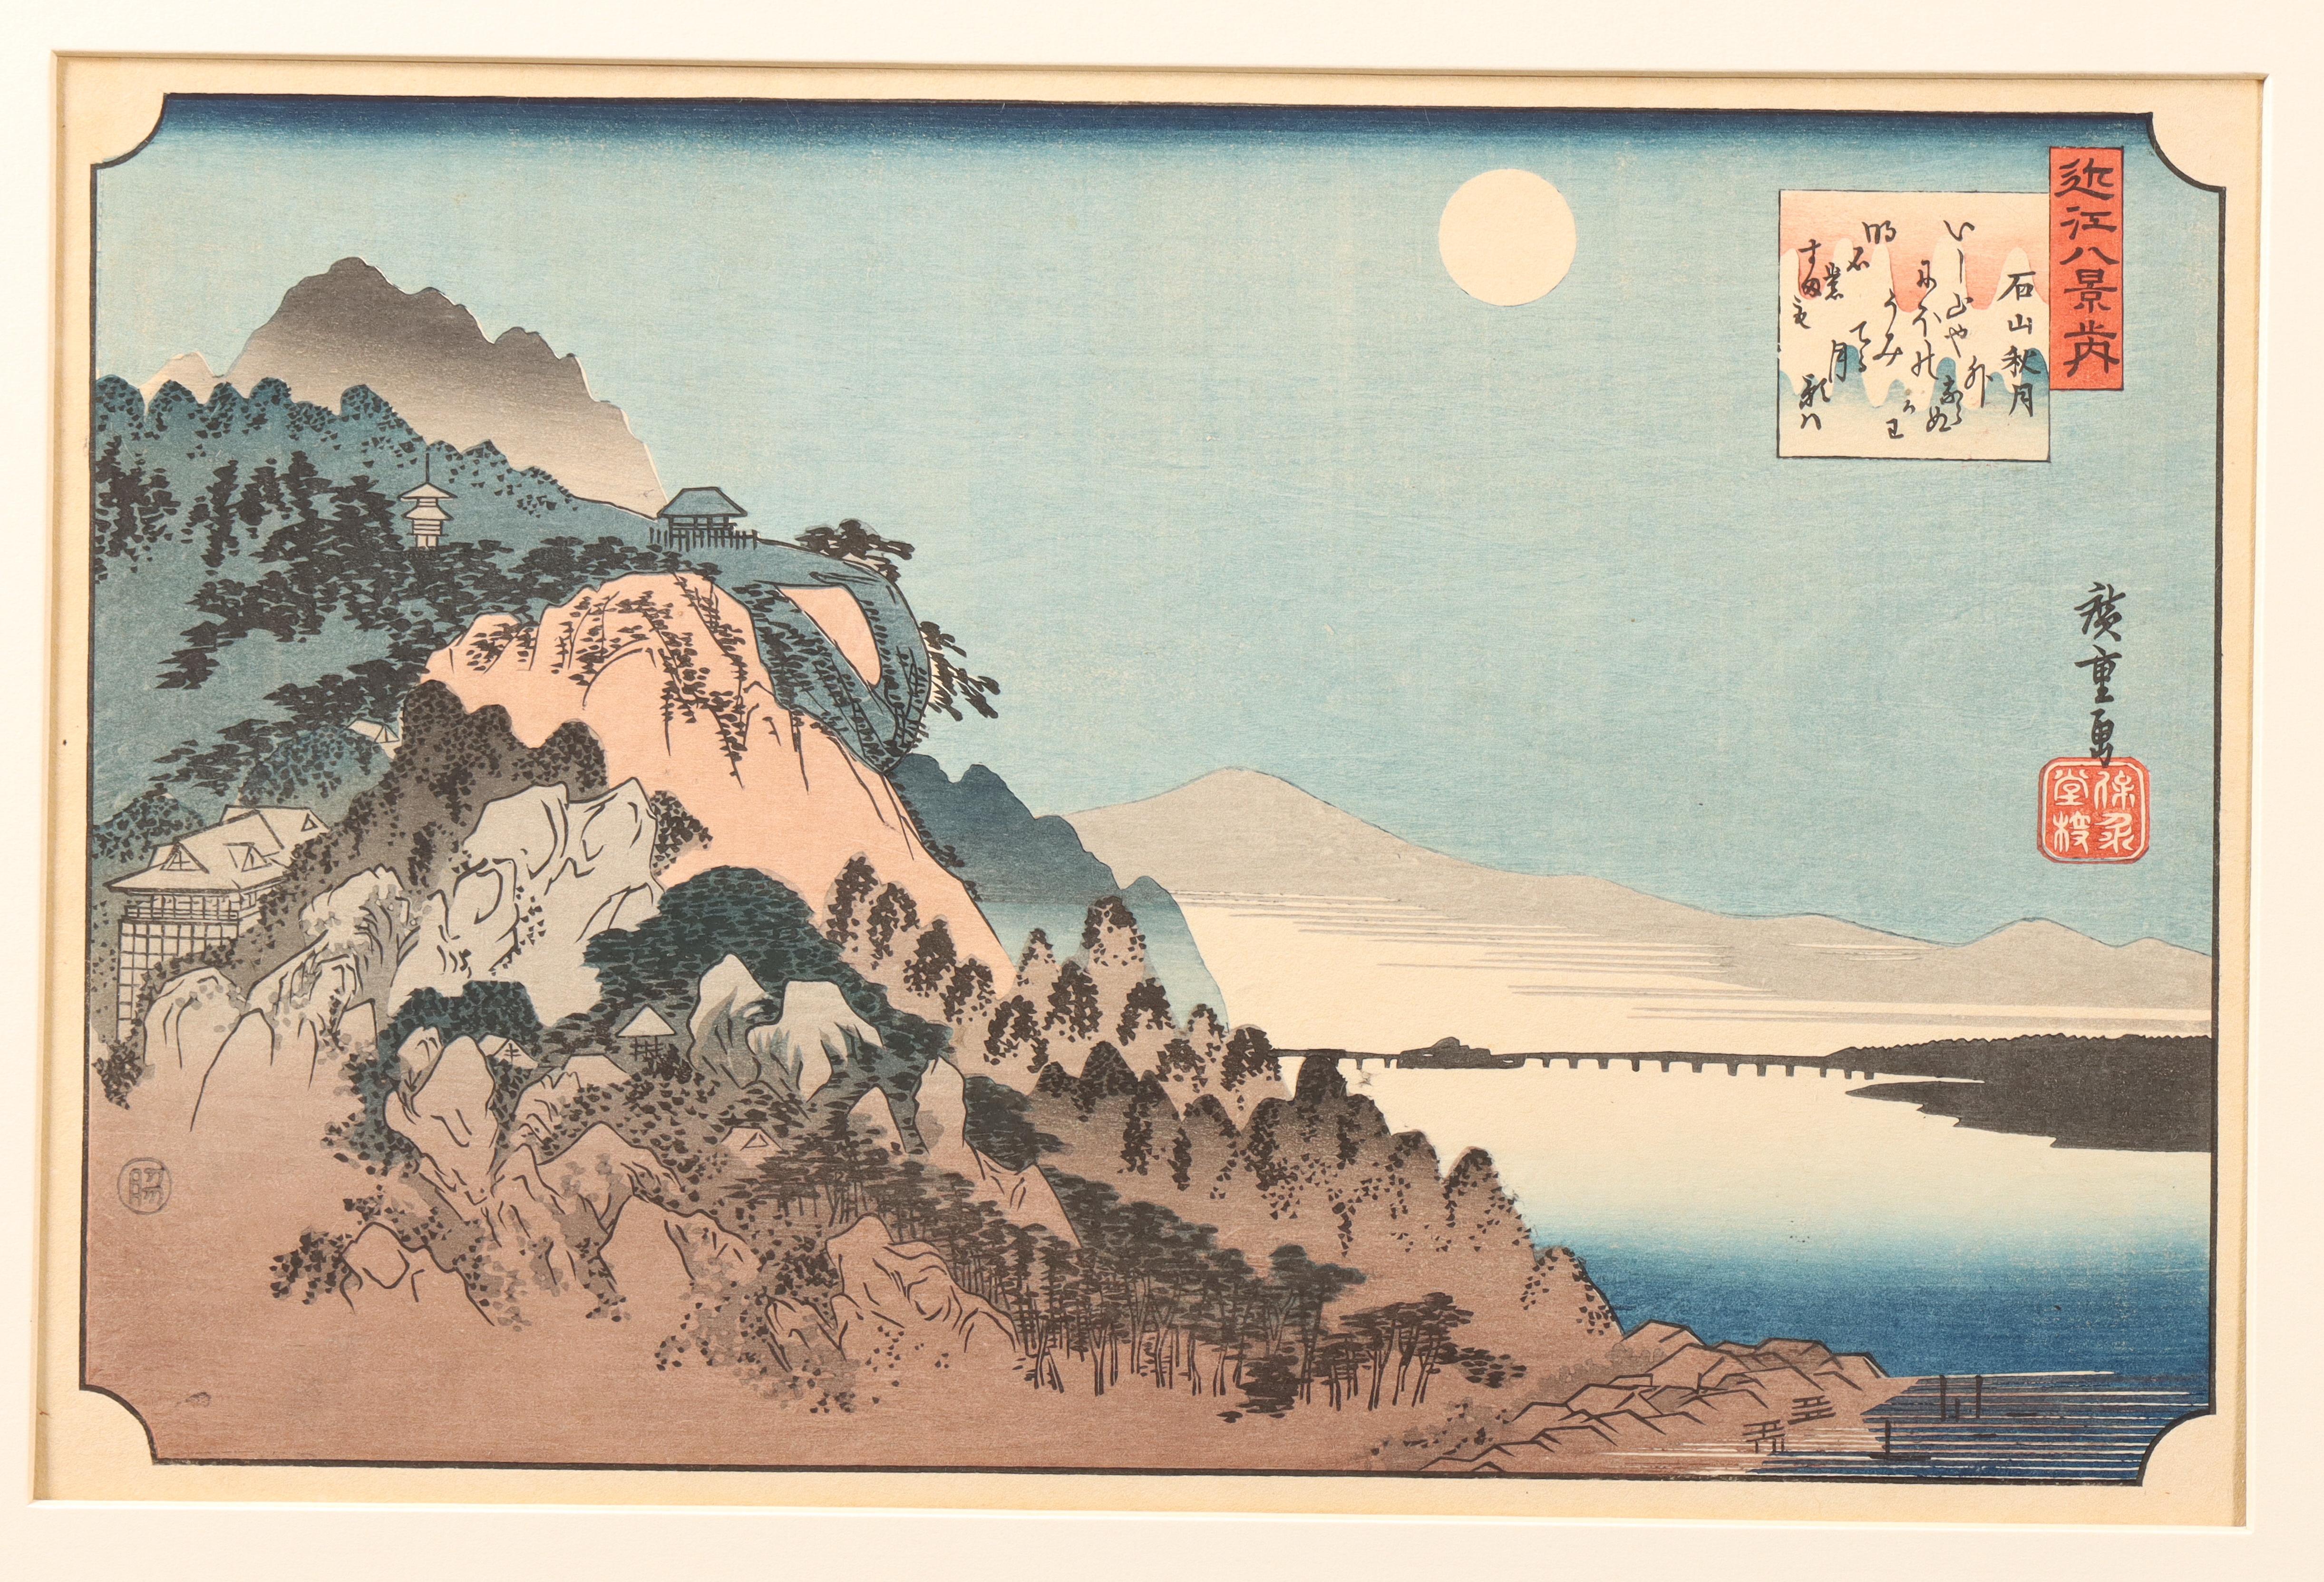 Japan, collection of woodblock prints, Hiroshige - Image 3 of 7